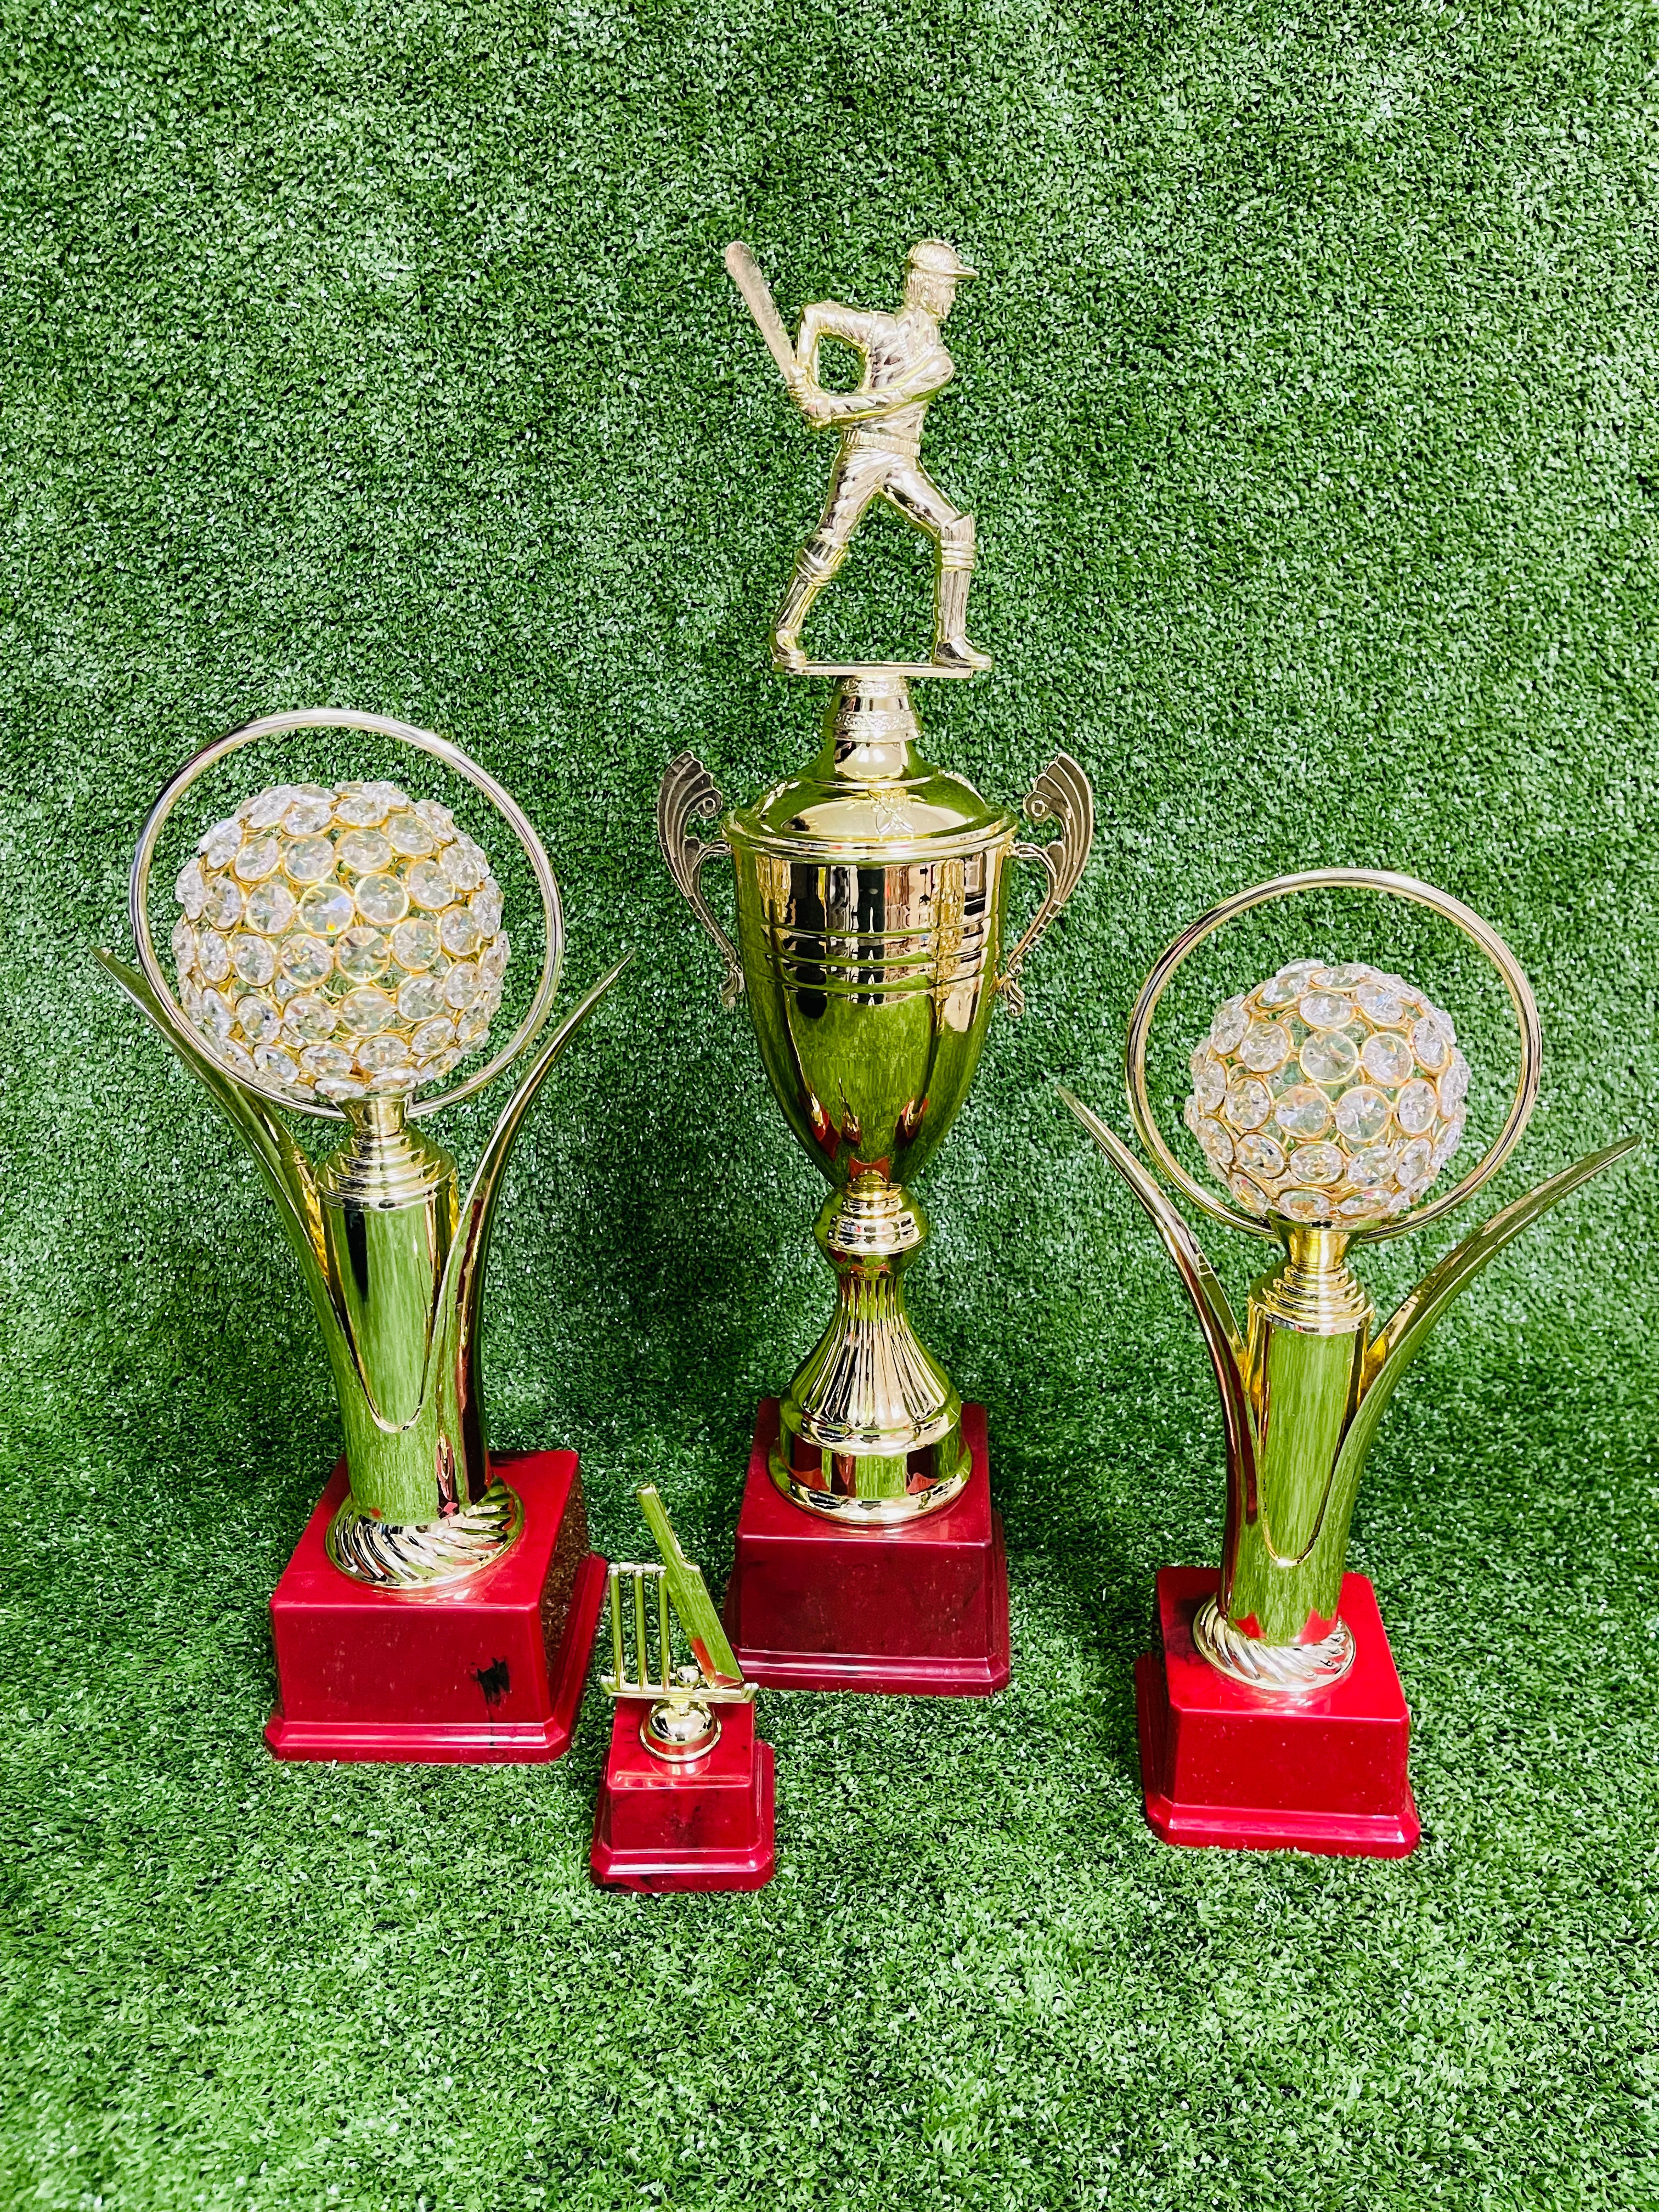 Raydn Cricket Trophy with Player Batting (20 inches)